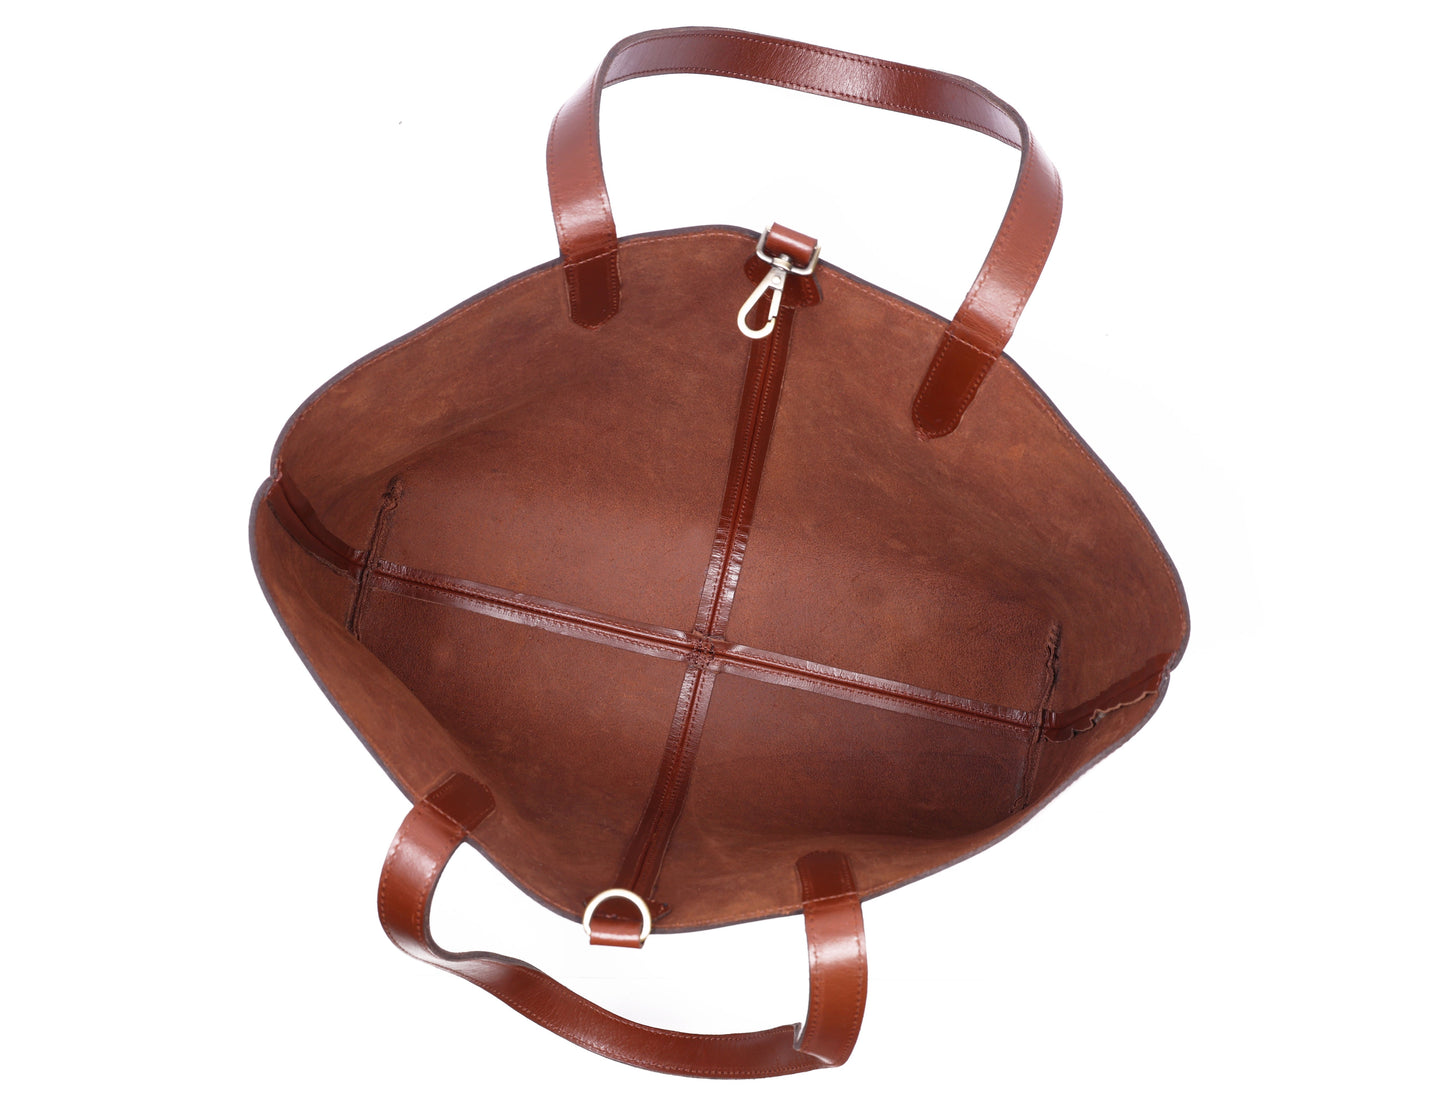 Classic Brown Leather Tote Bag - Elegance Meets Functionality. - CELTICINDIA